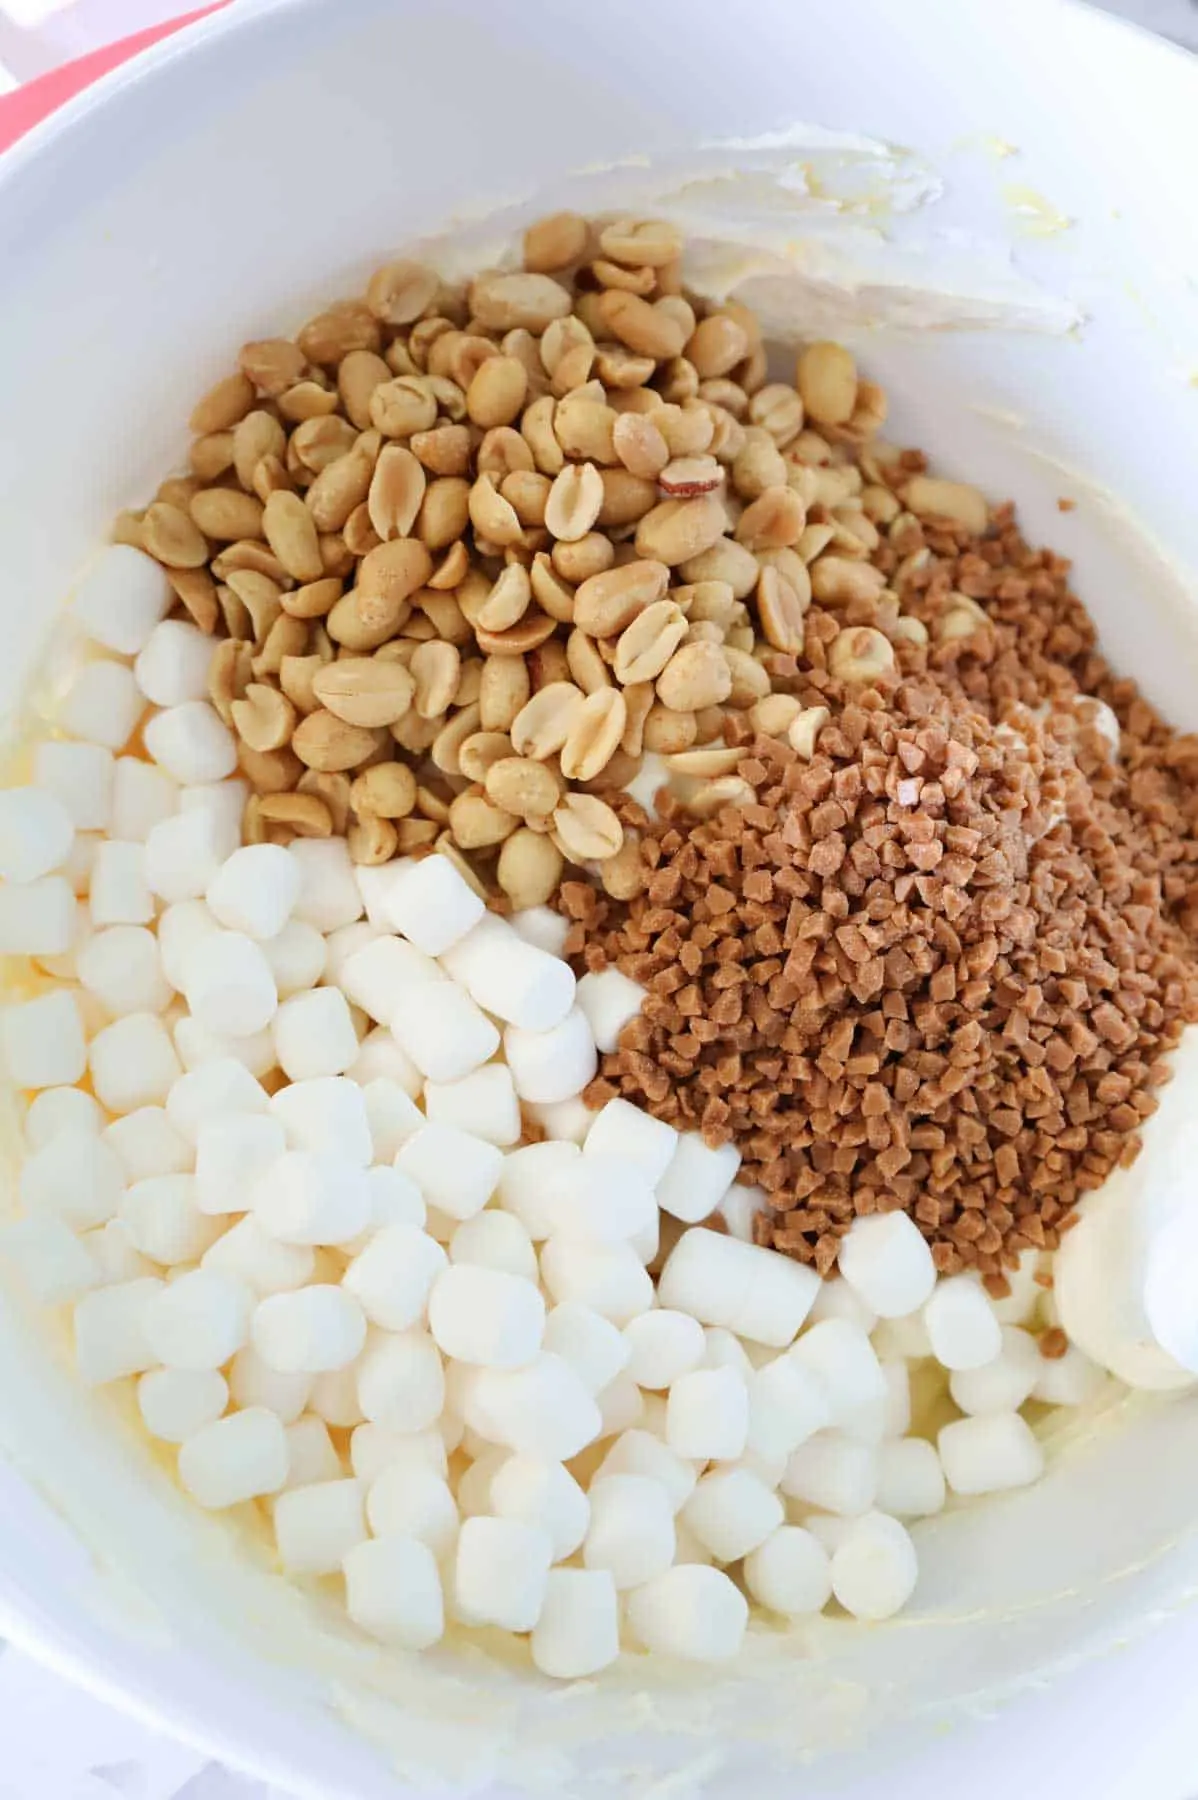 salted peanuts, Skor bits and mini marshmallows in a mixing bowl